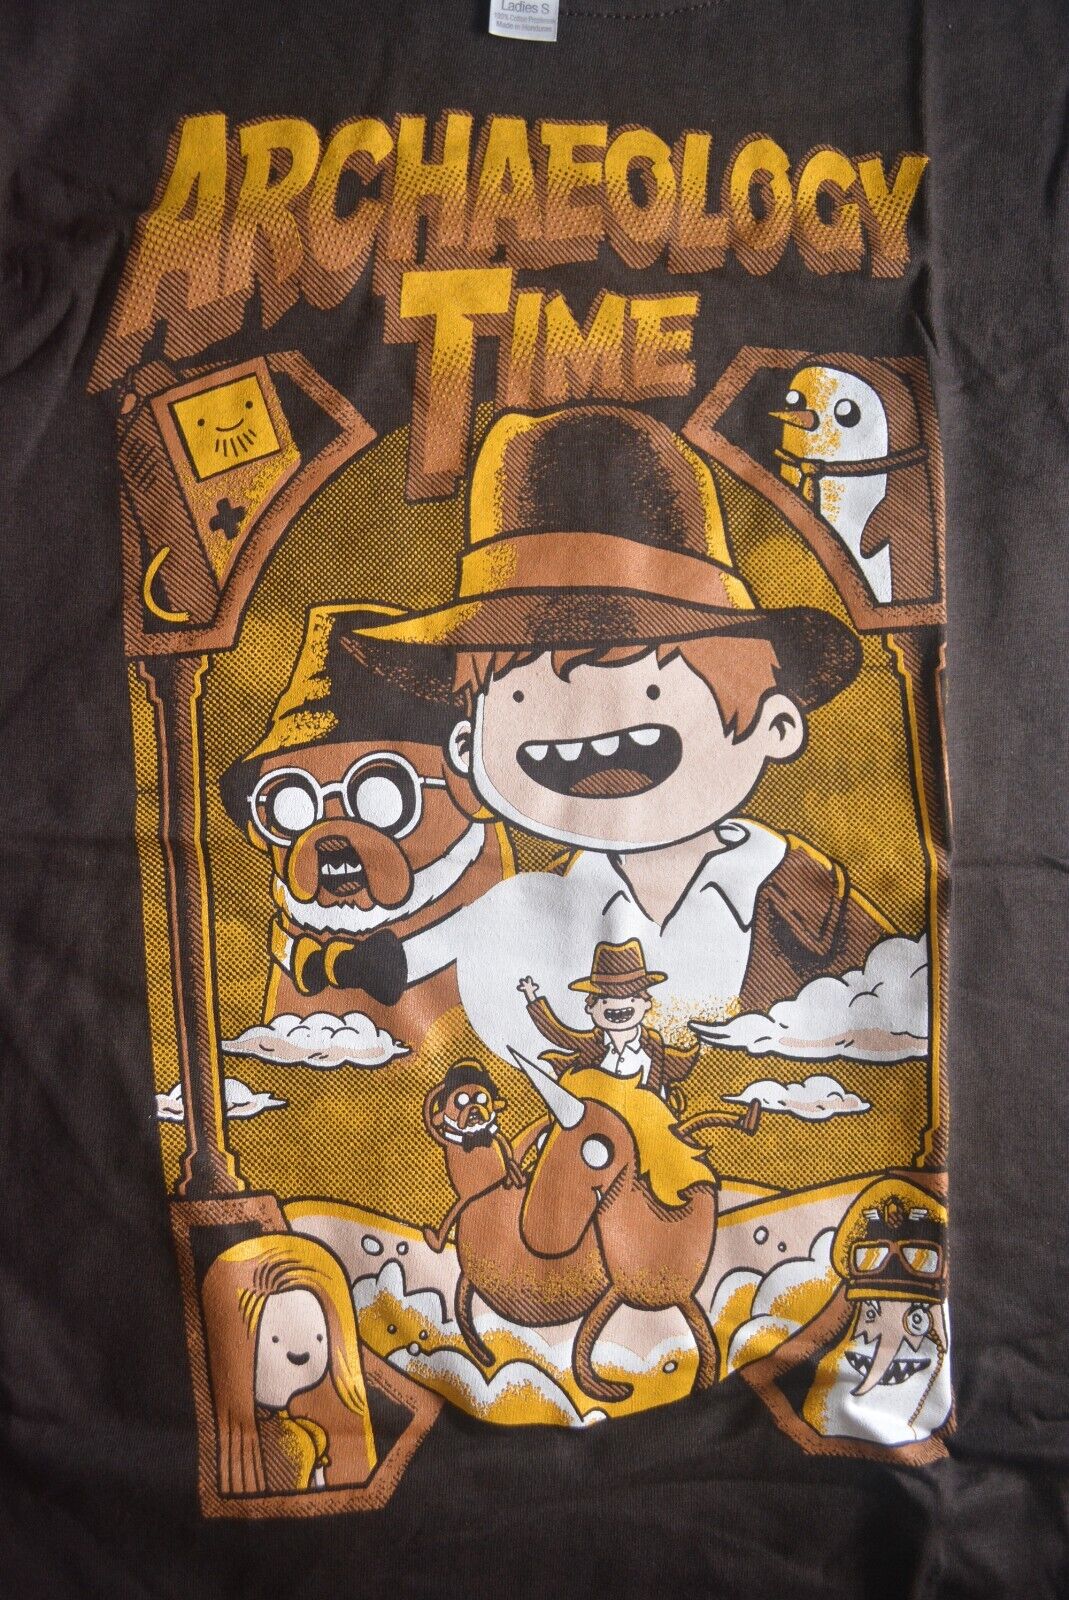 Women’s Adventure Time “Archaeology Time” T-Shirt Size Ladies Small